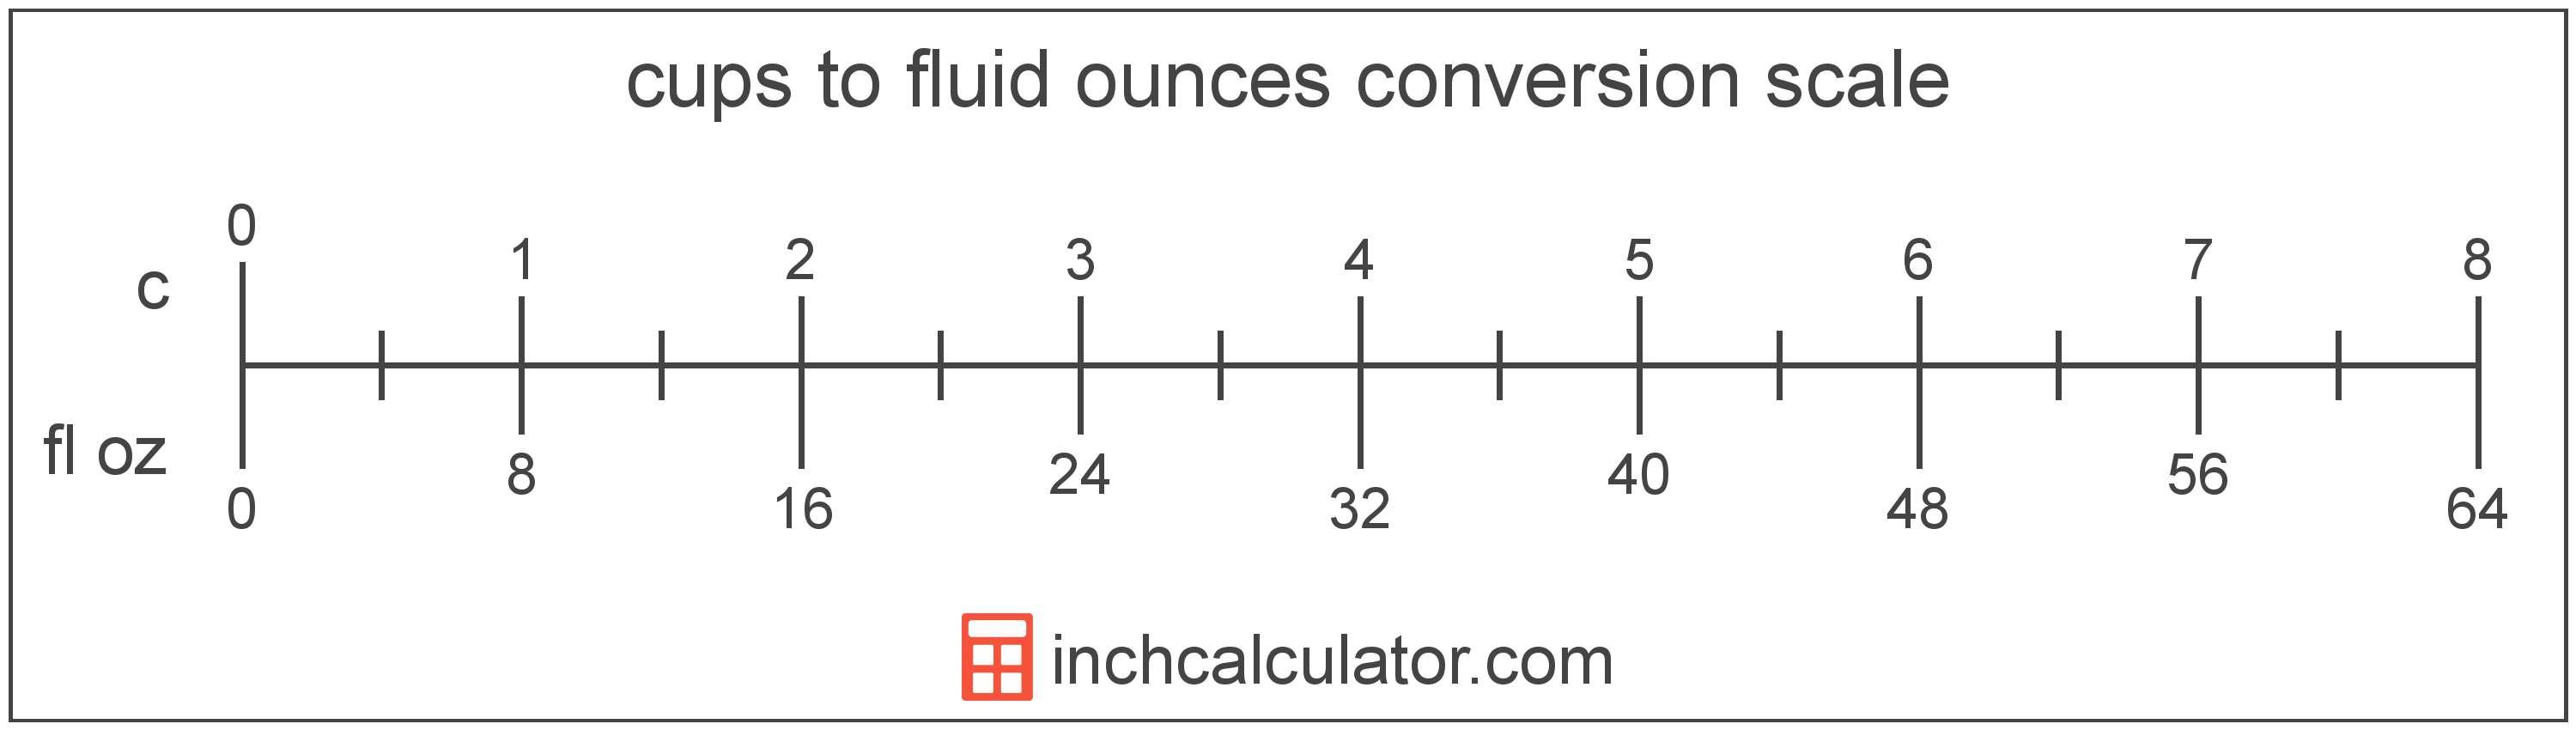 conversion scale showing cups and equivalent fluid ounces volume values